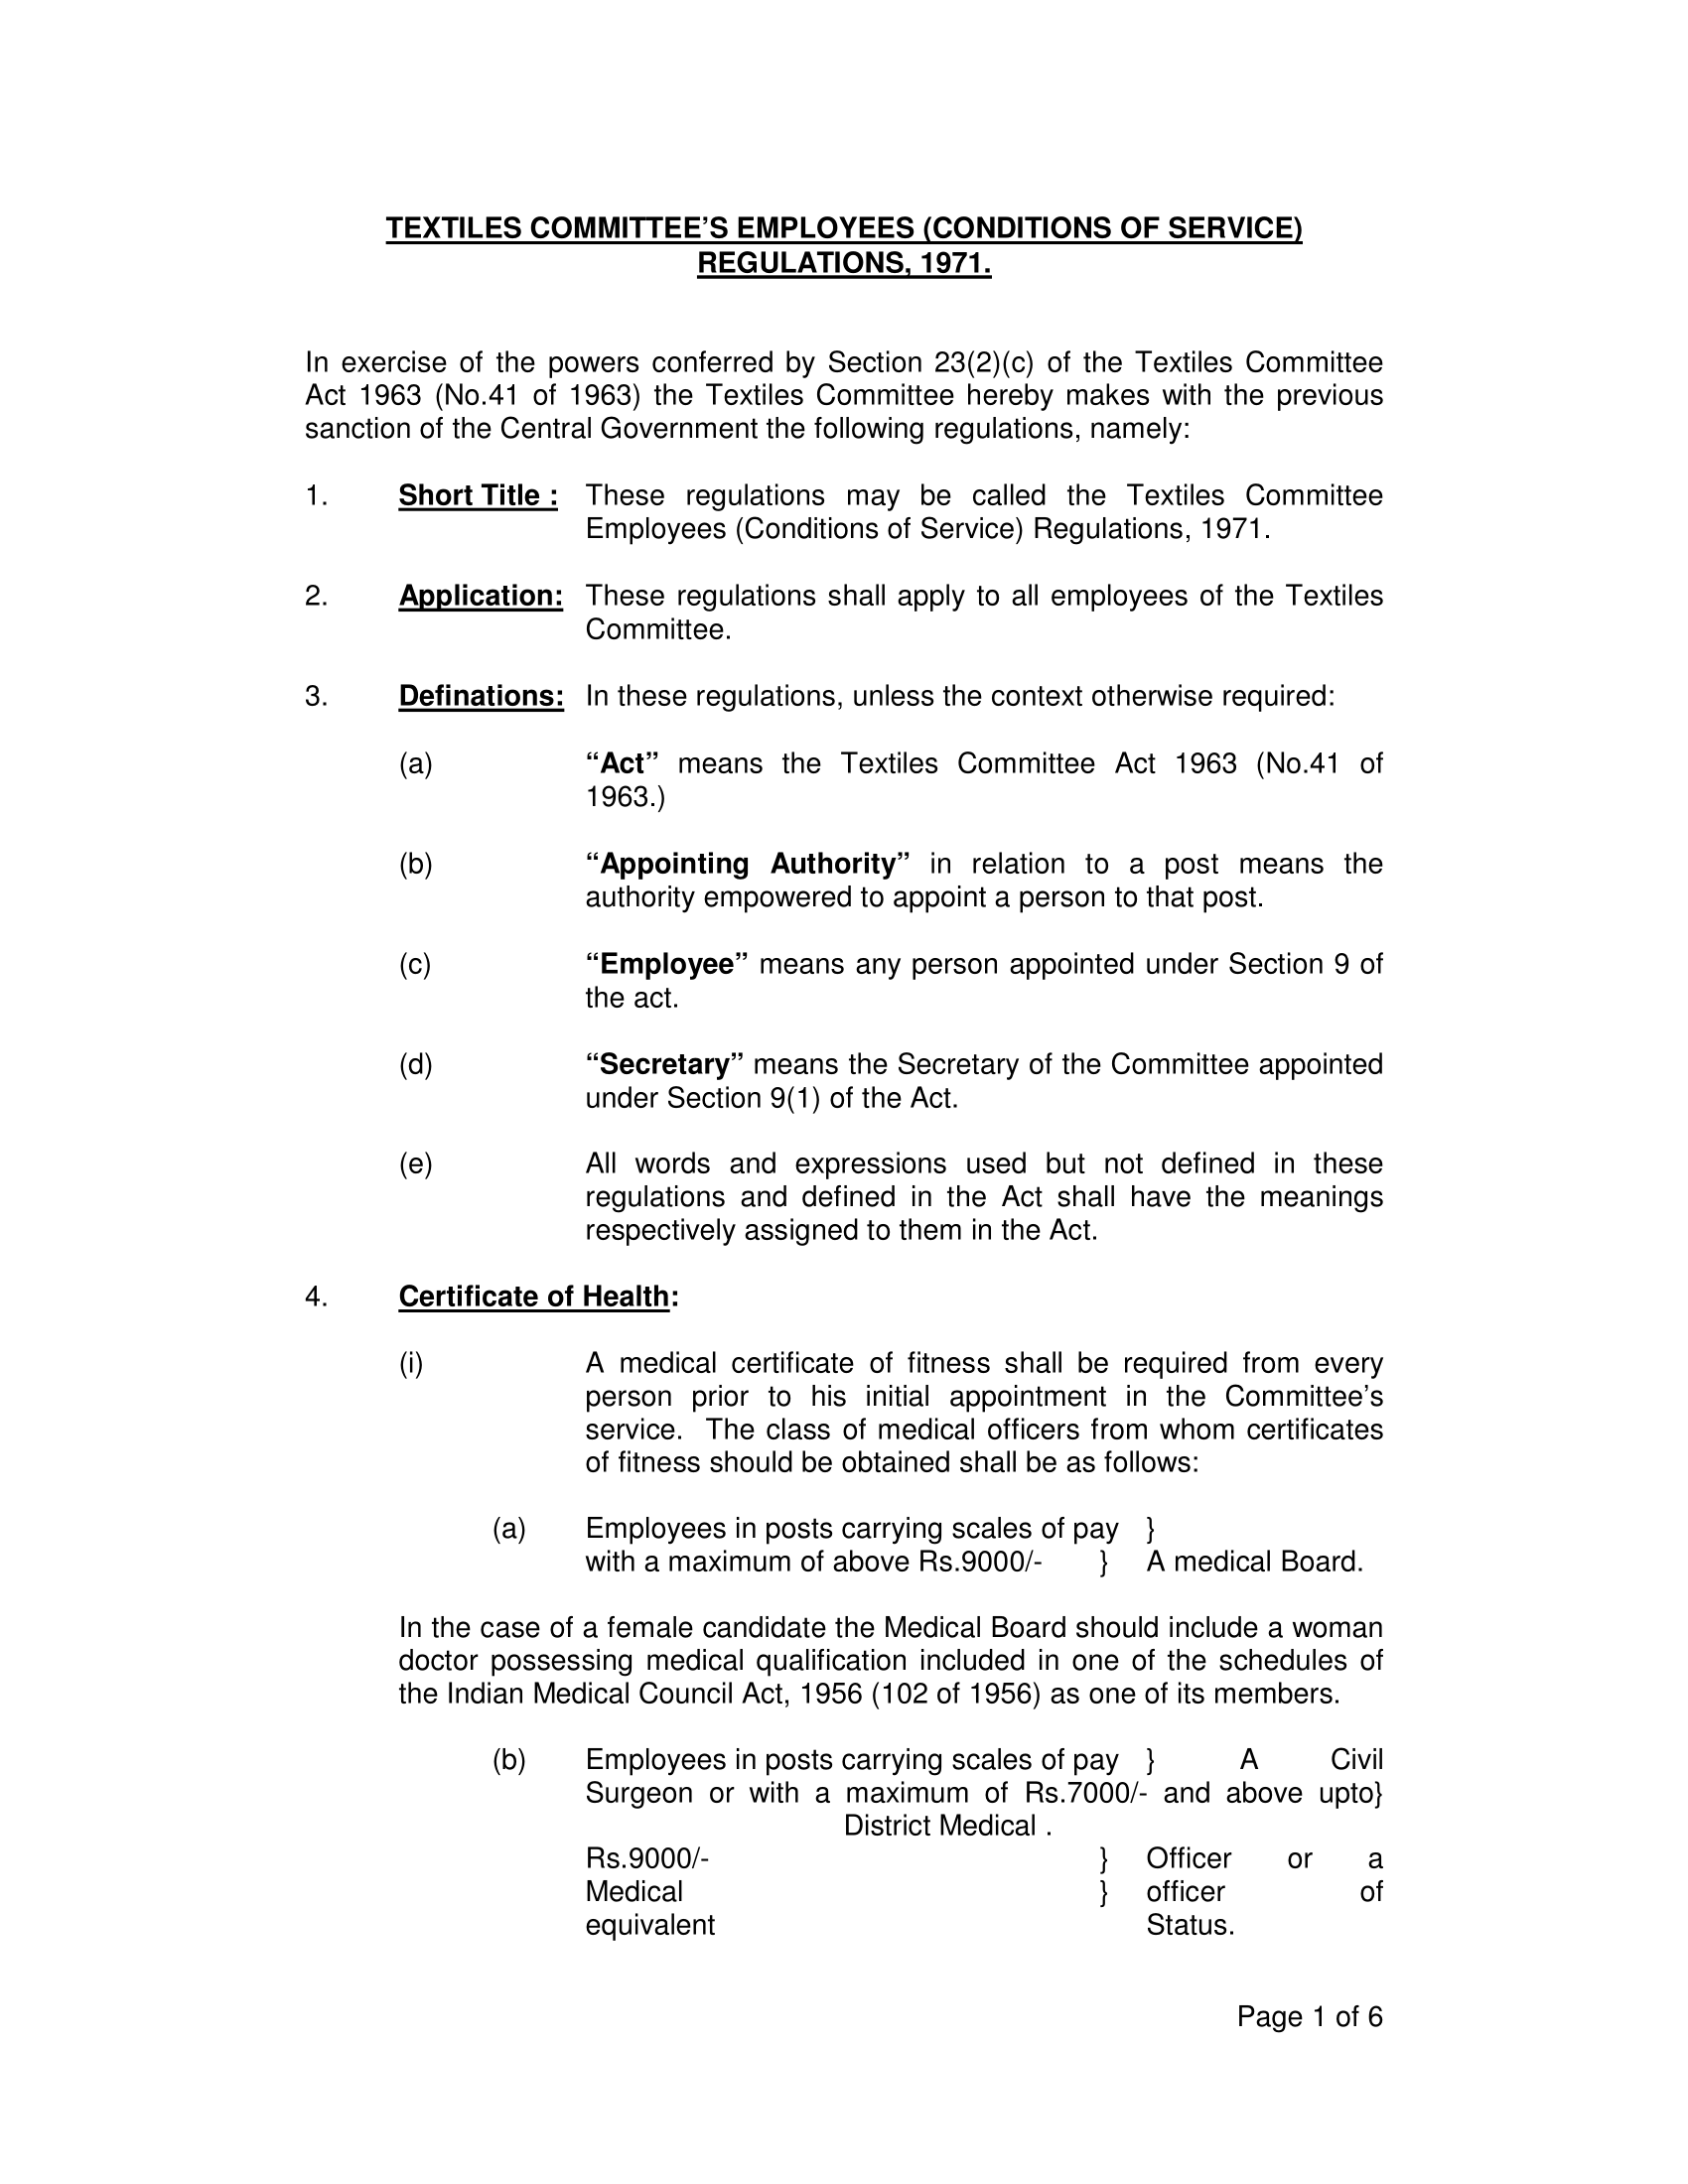 Textile Committee Employees (Conditions of Service)